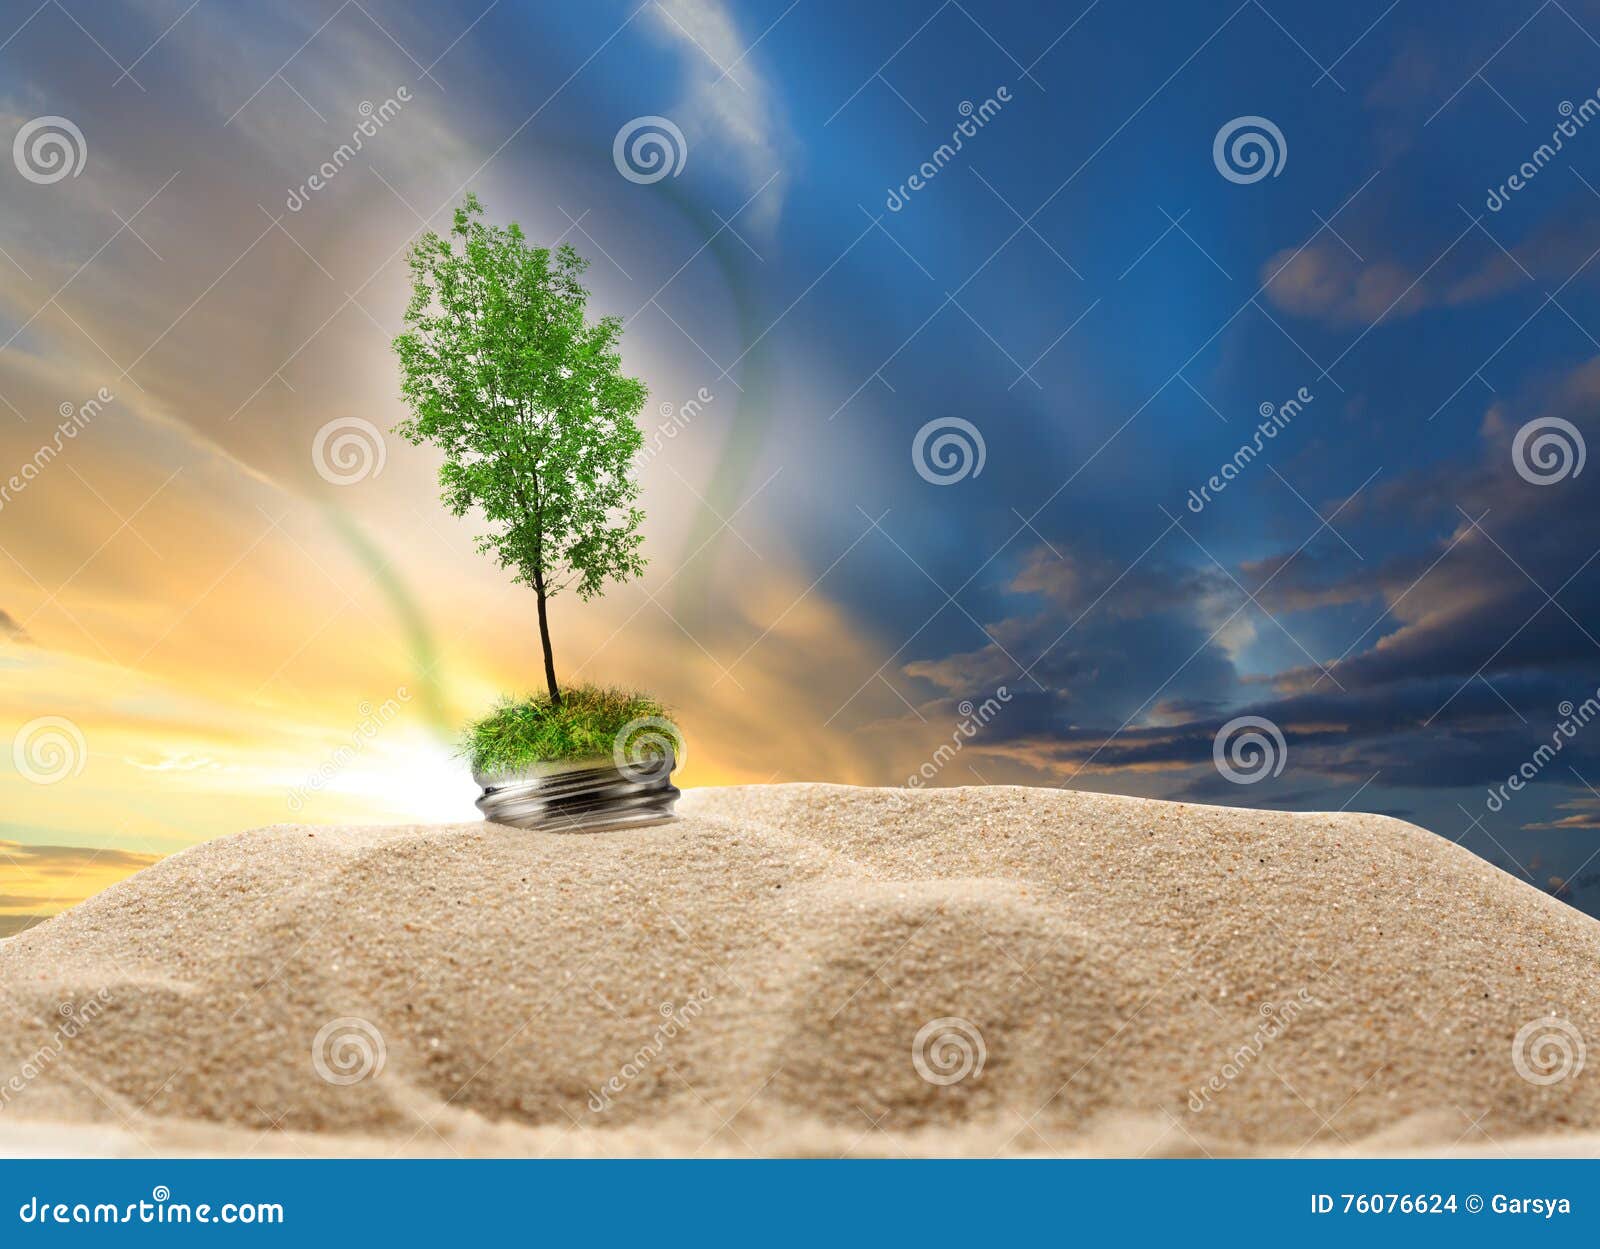 Green Ash Tree Inside Lamp In Sand On Sunset Stock Photo Image Of